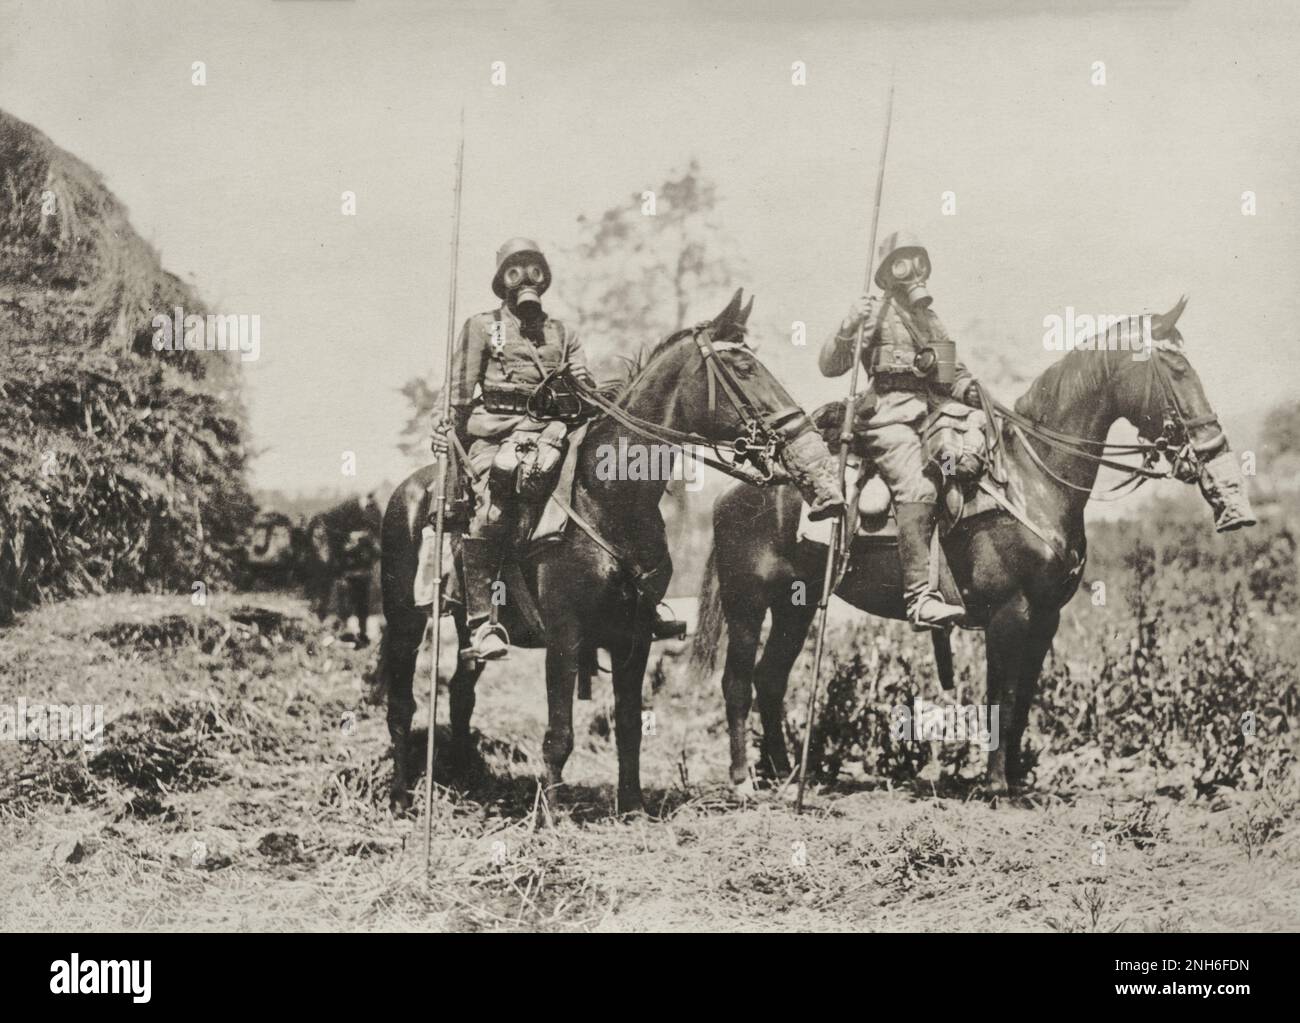 1914-1918. World War I. This portrait shows two German cavalry soldiers armed with lances, called ulans. Both men and horses wear gas masks. Stock Photo